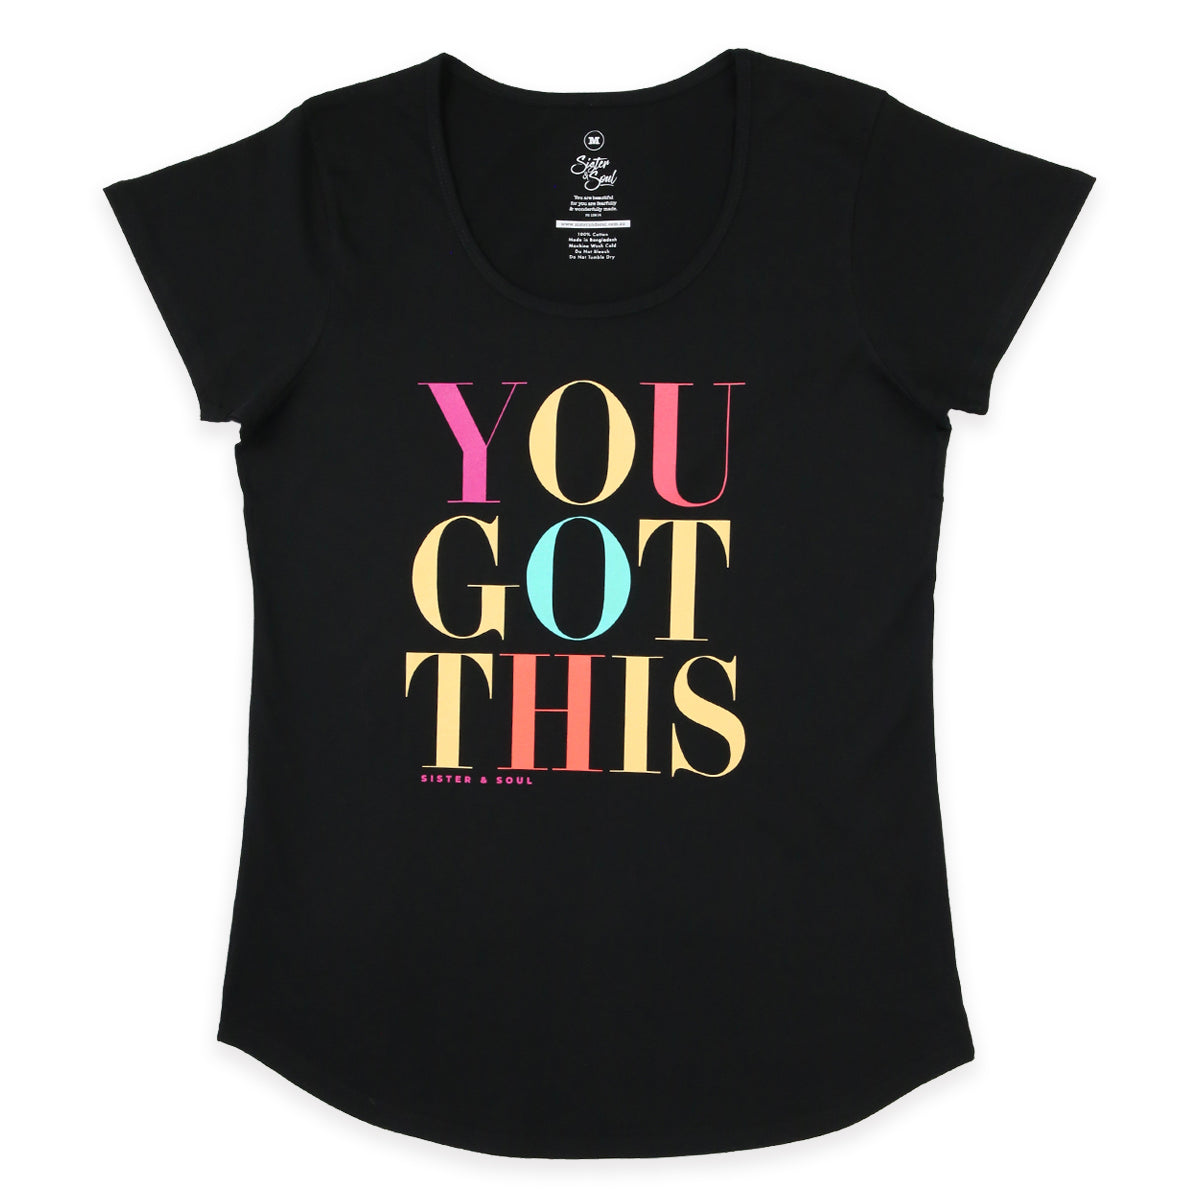 YOU GOT THIS Tee - Black Scoopy - Colourful Print